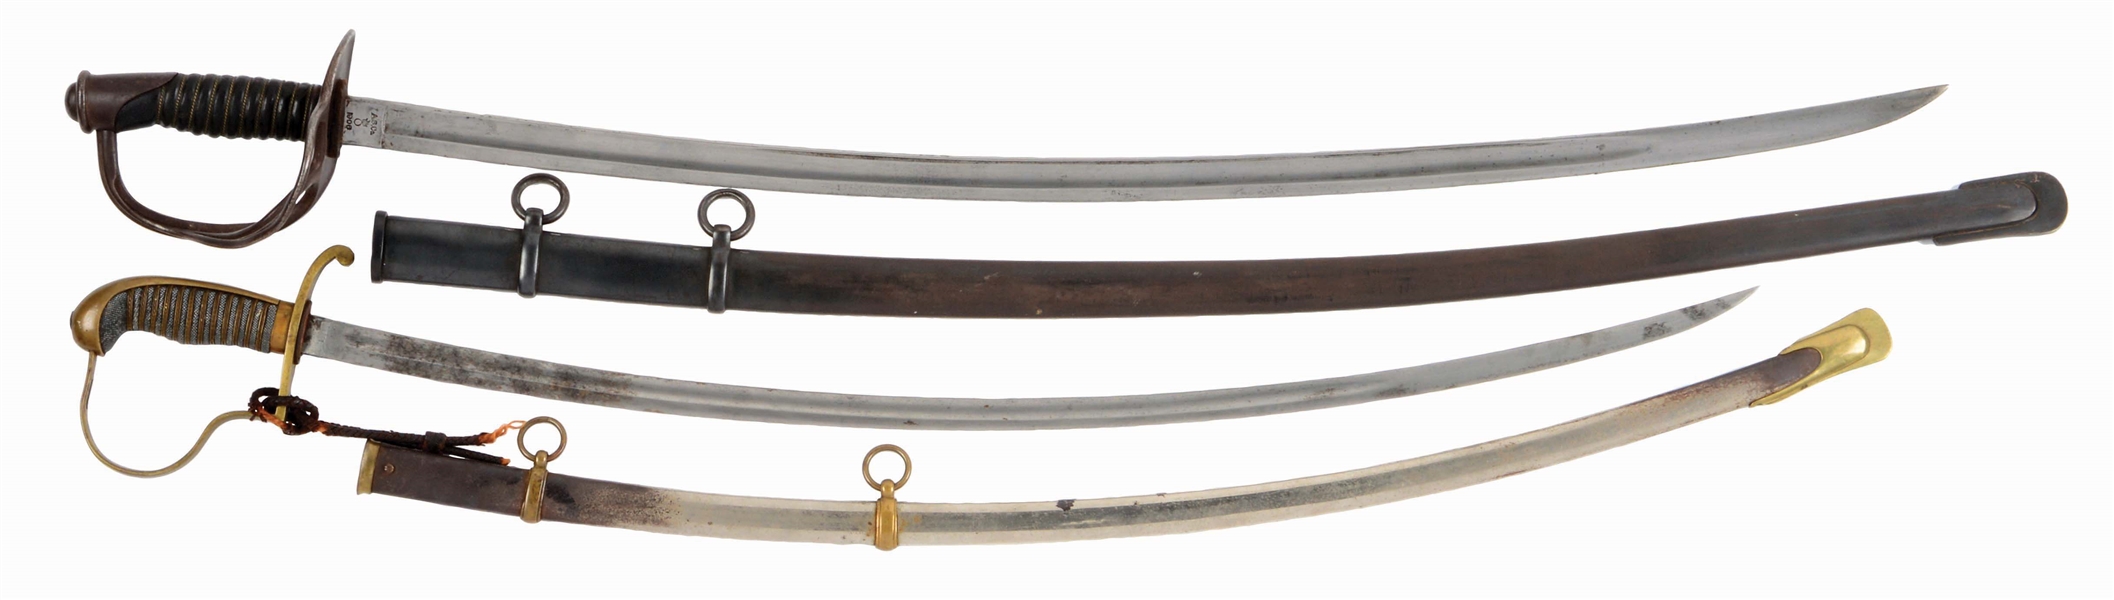 LOT OF 2: 1906 CAVALRY SABER AND 1872 ARTILLERY SABER. 